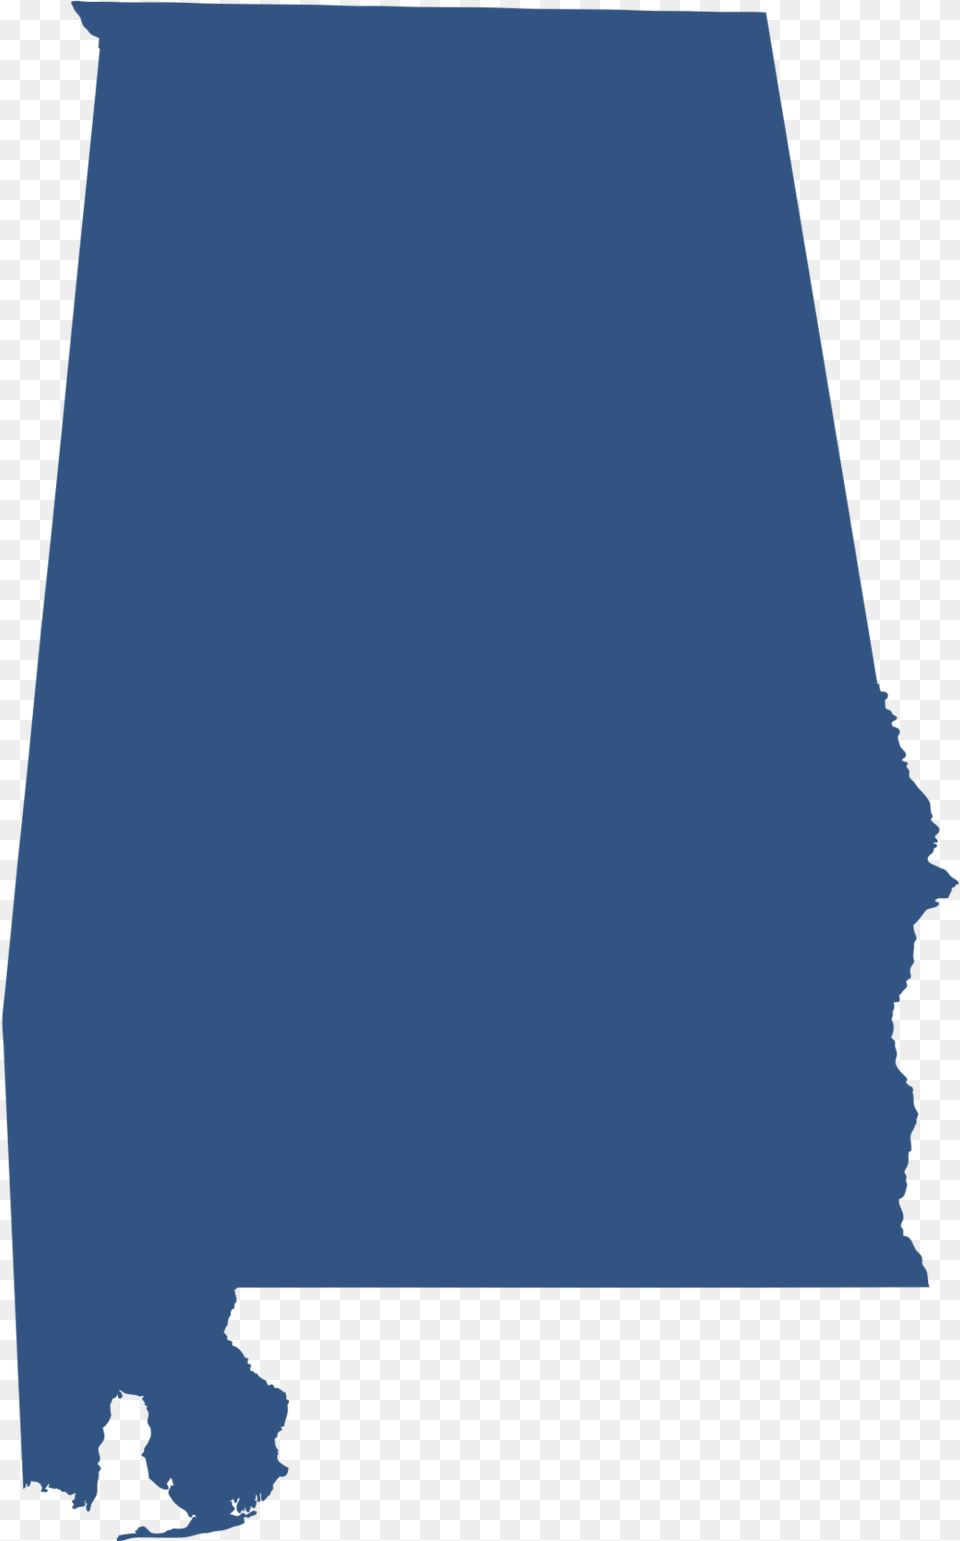 Alabama State Of Alabama Transparent, Silhouette, Text, Person, People Png Image